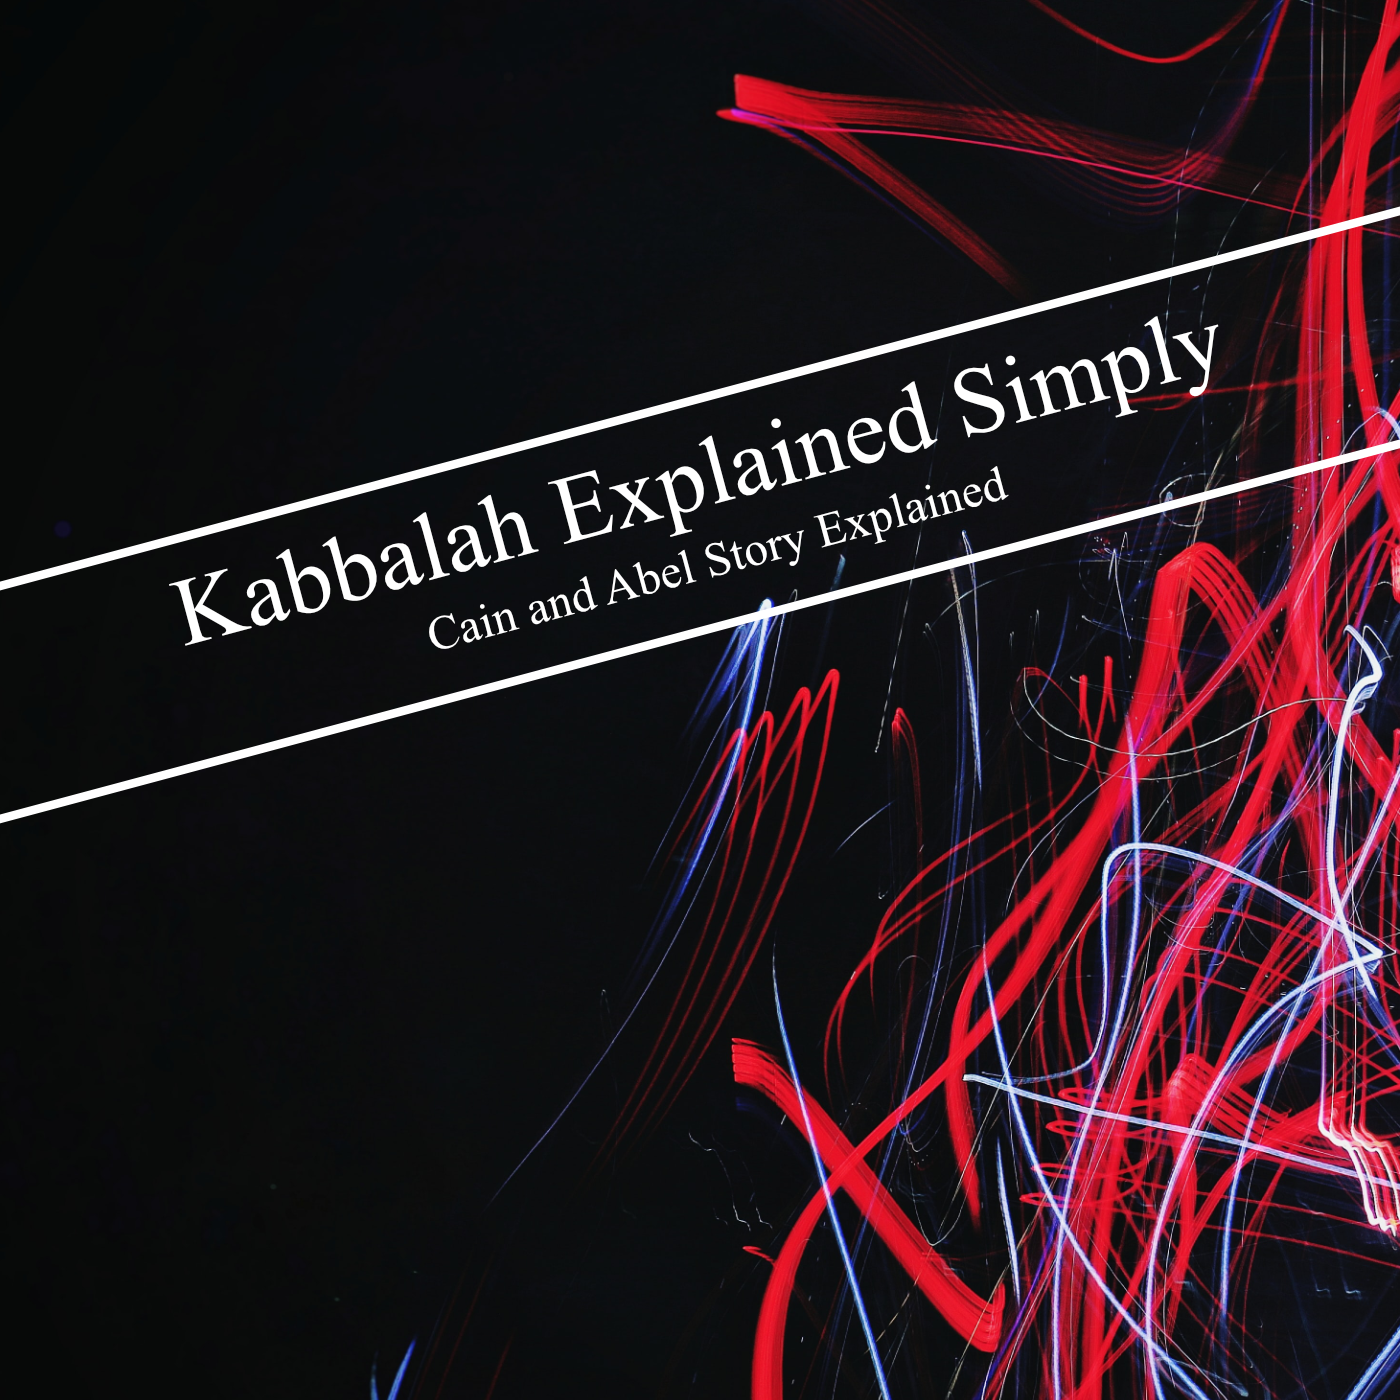 Kabbalah Explained Simply - Cain and Abel Story Explained